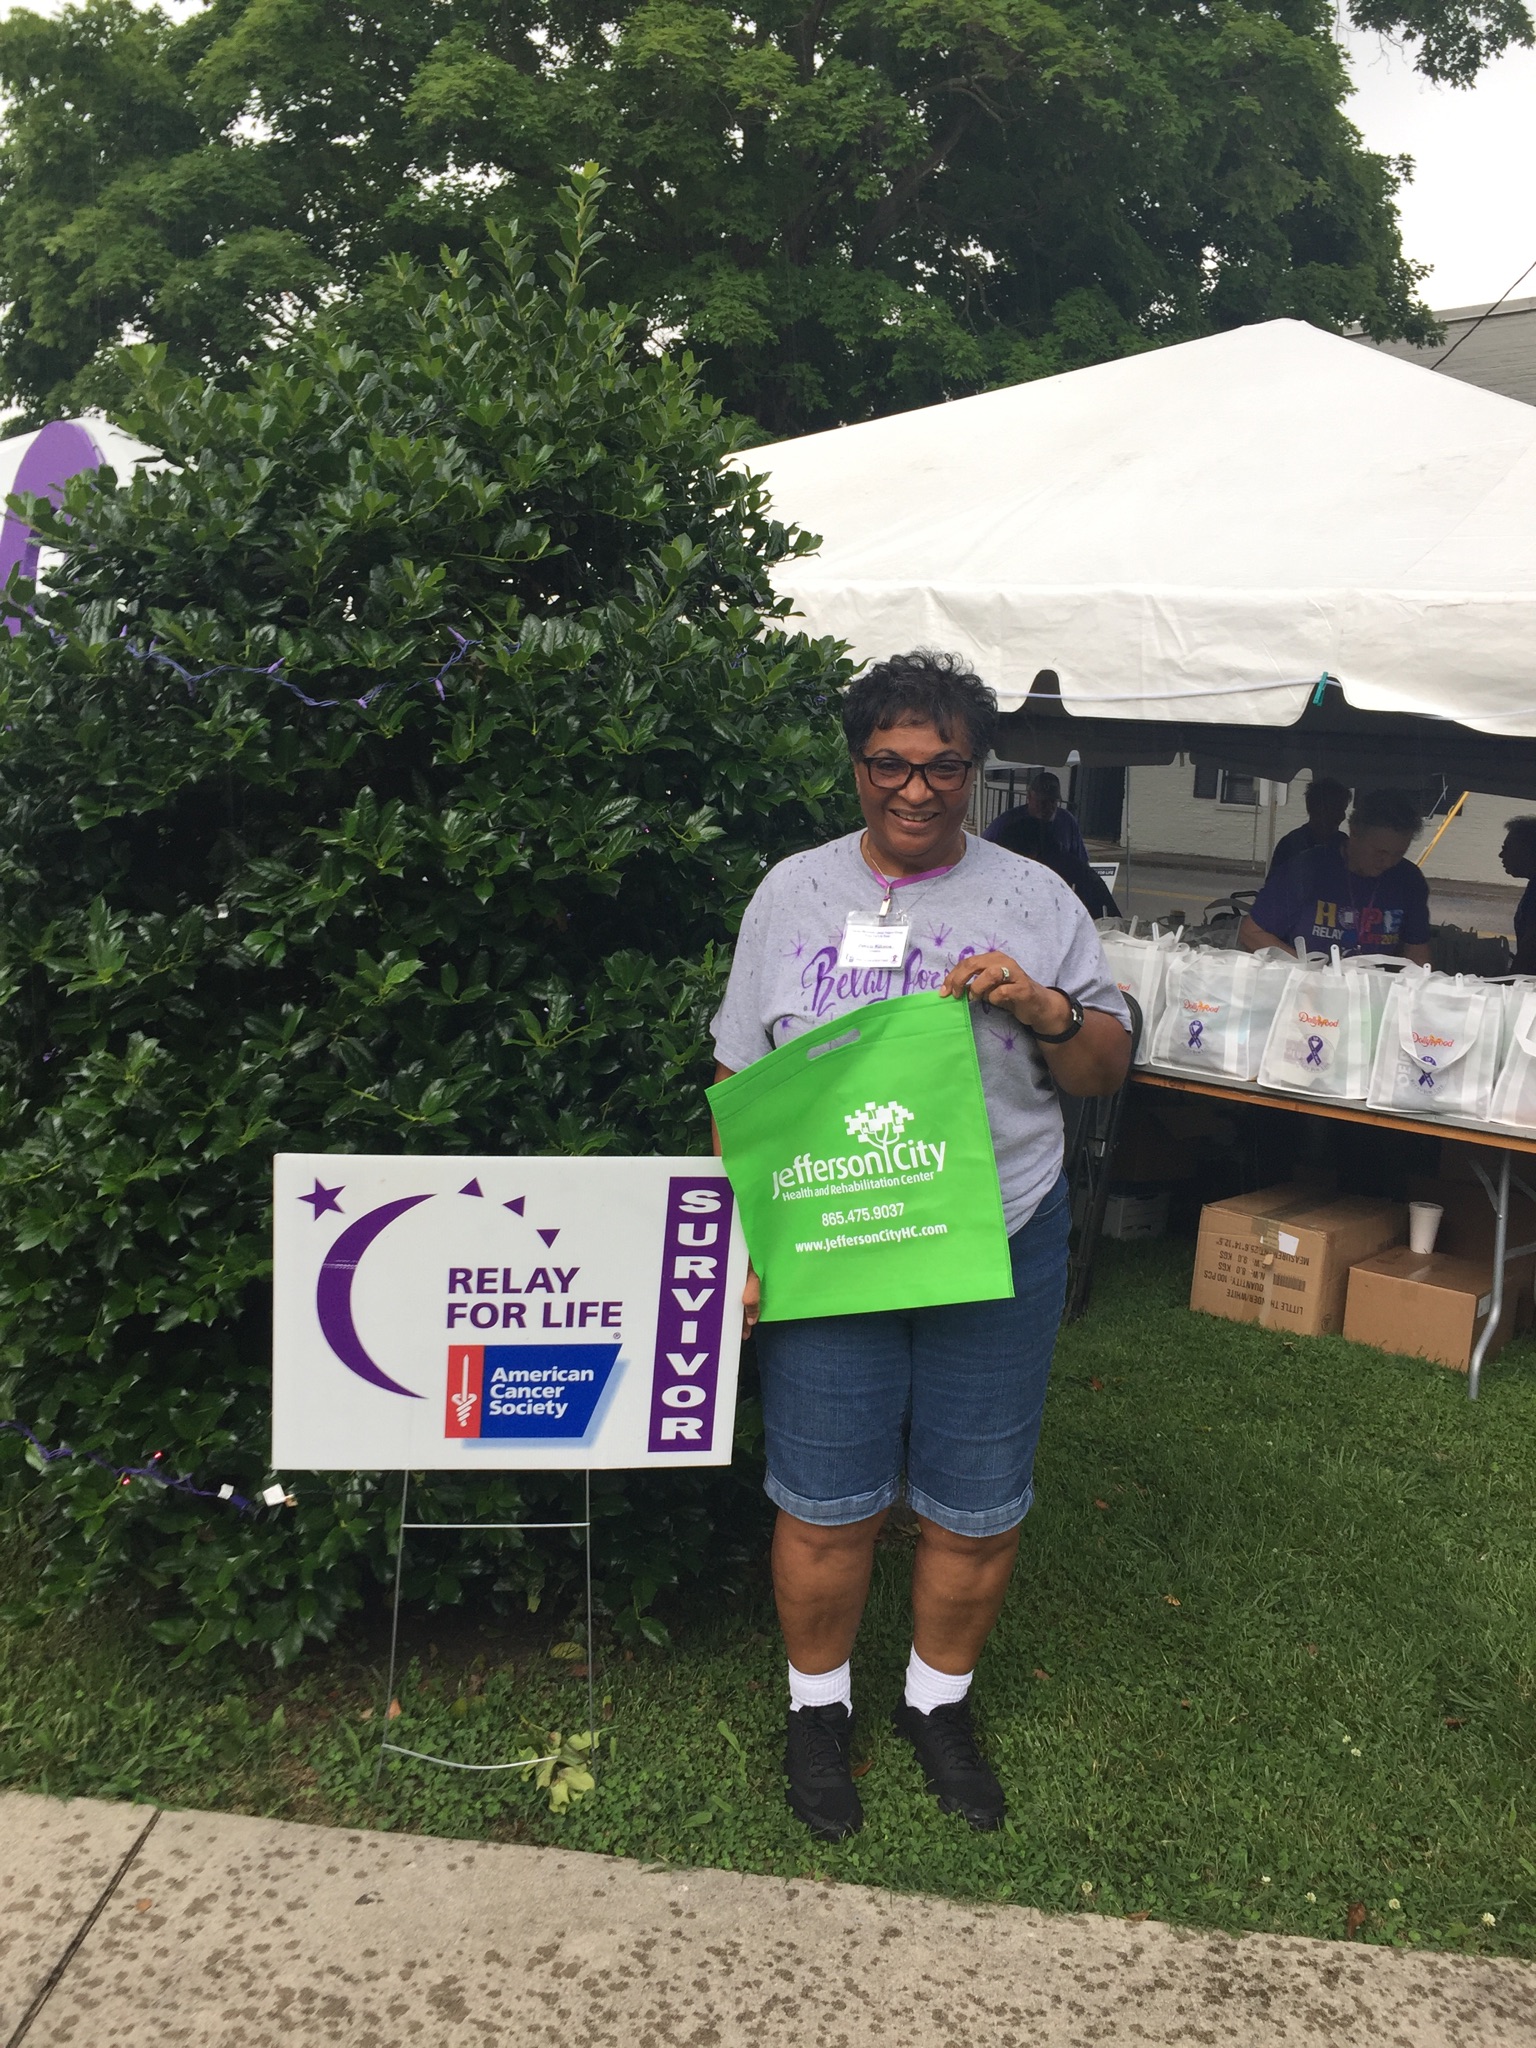 Pat holding up Jefferson City tote bag in front of Relay for Life Sign